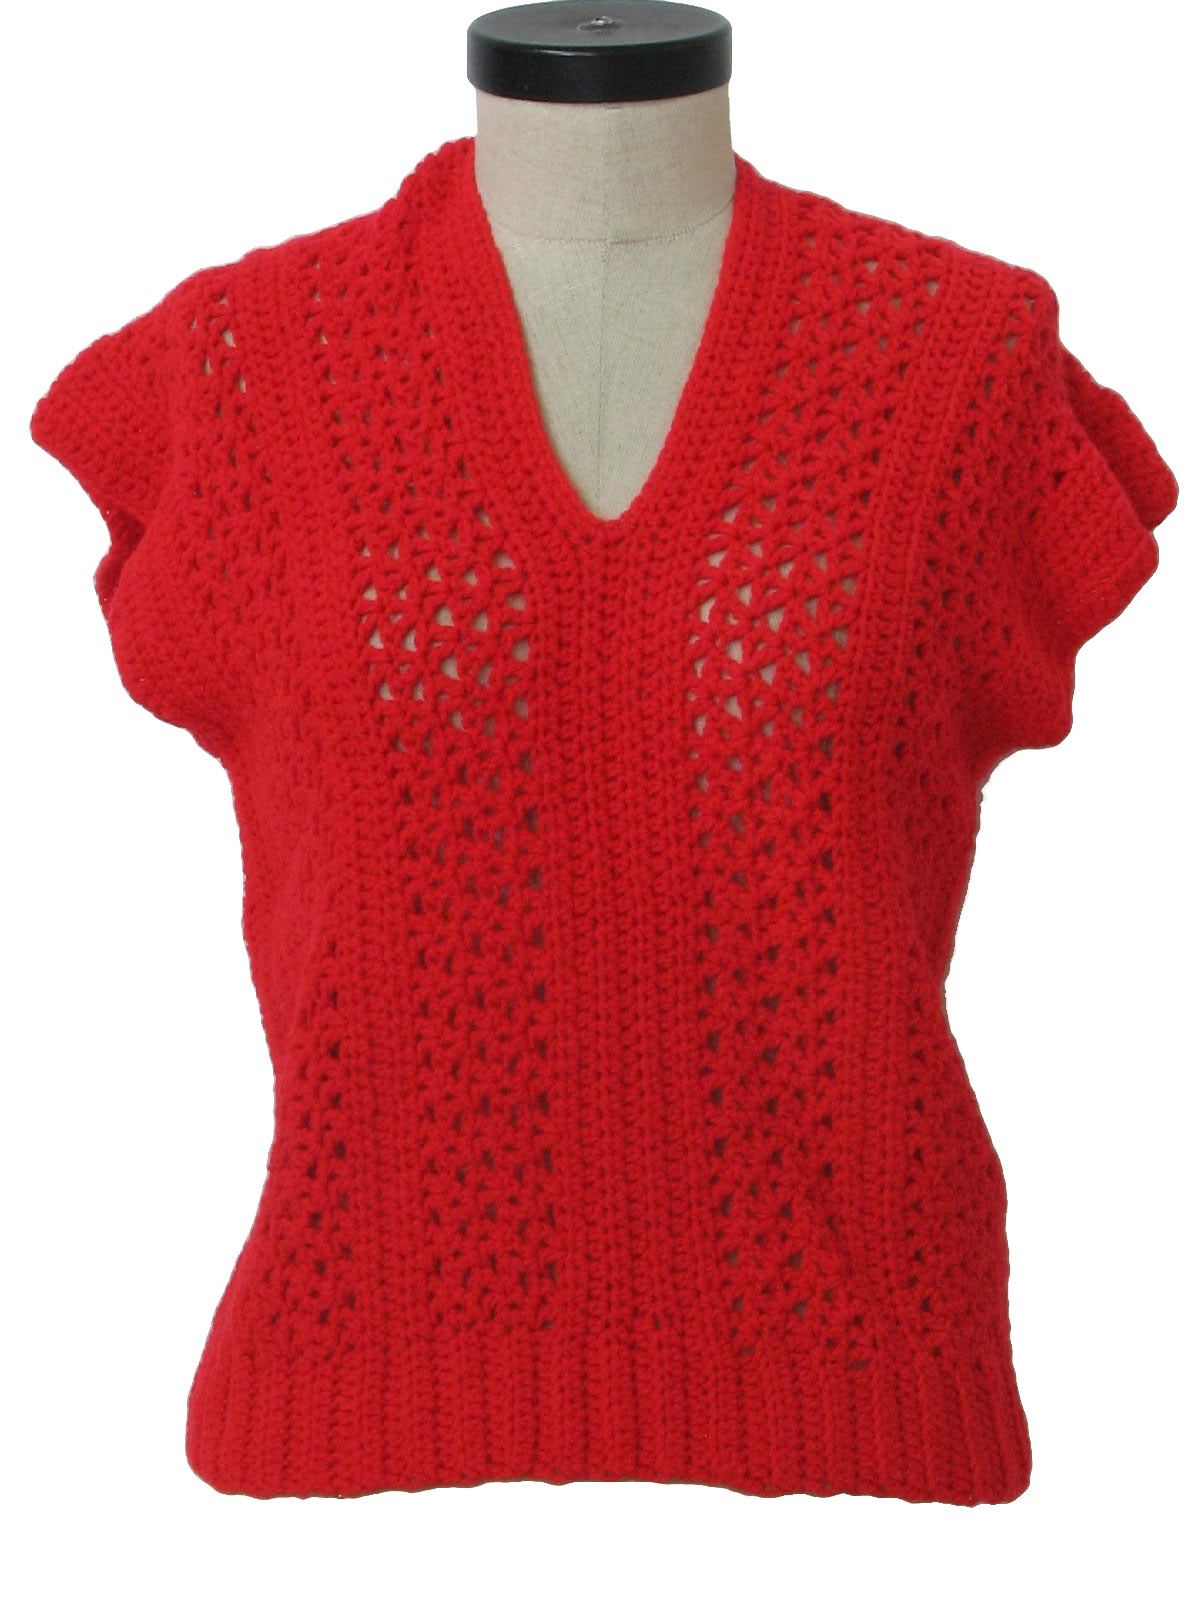 80's Missing Label Sweater: 80s -Missing Label- Womens red open weave ...